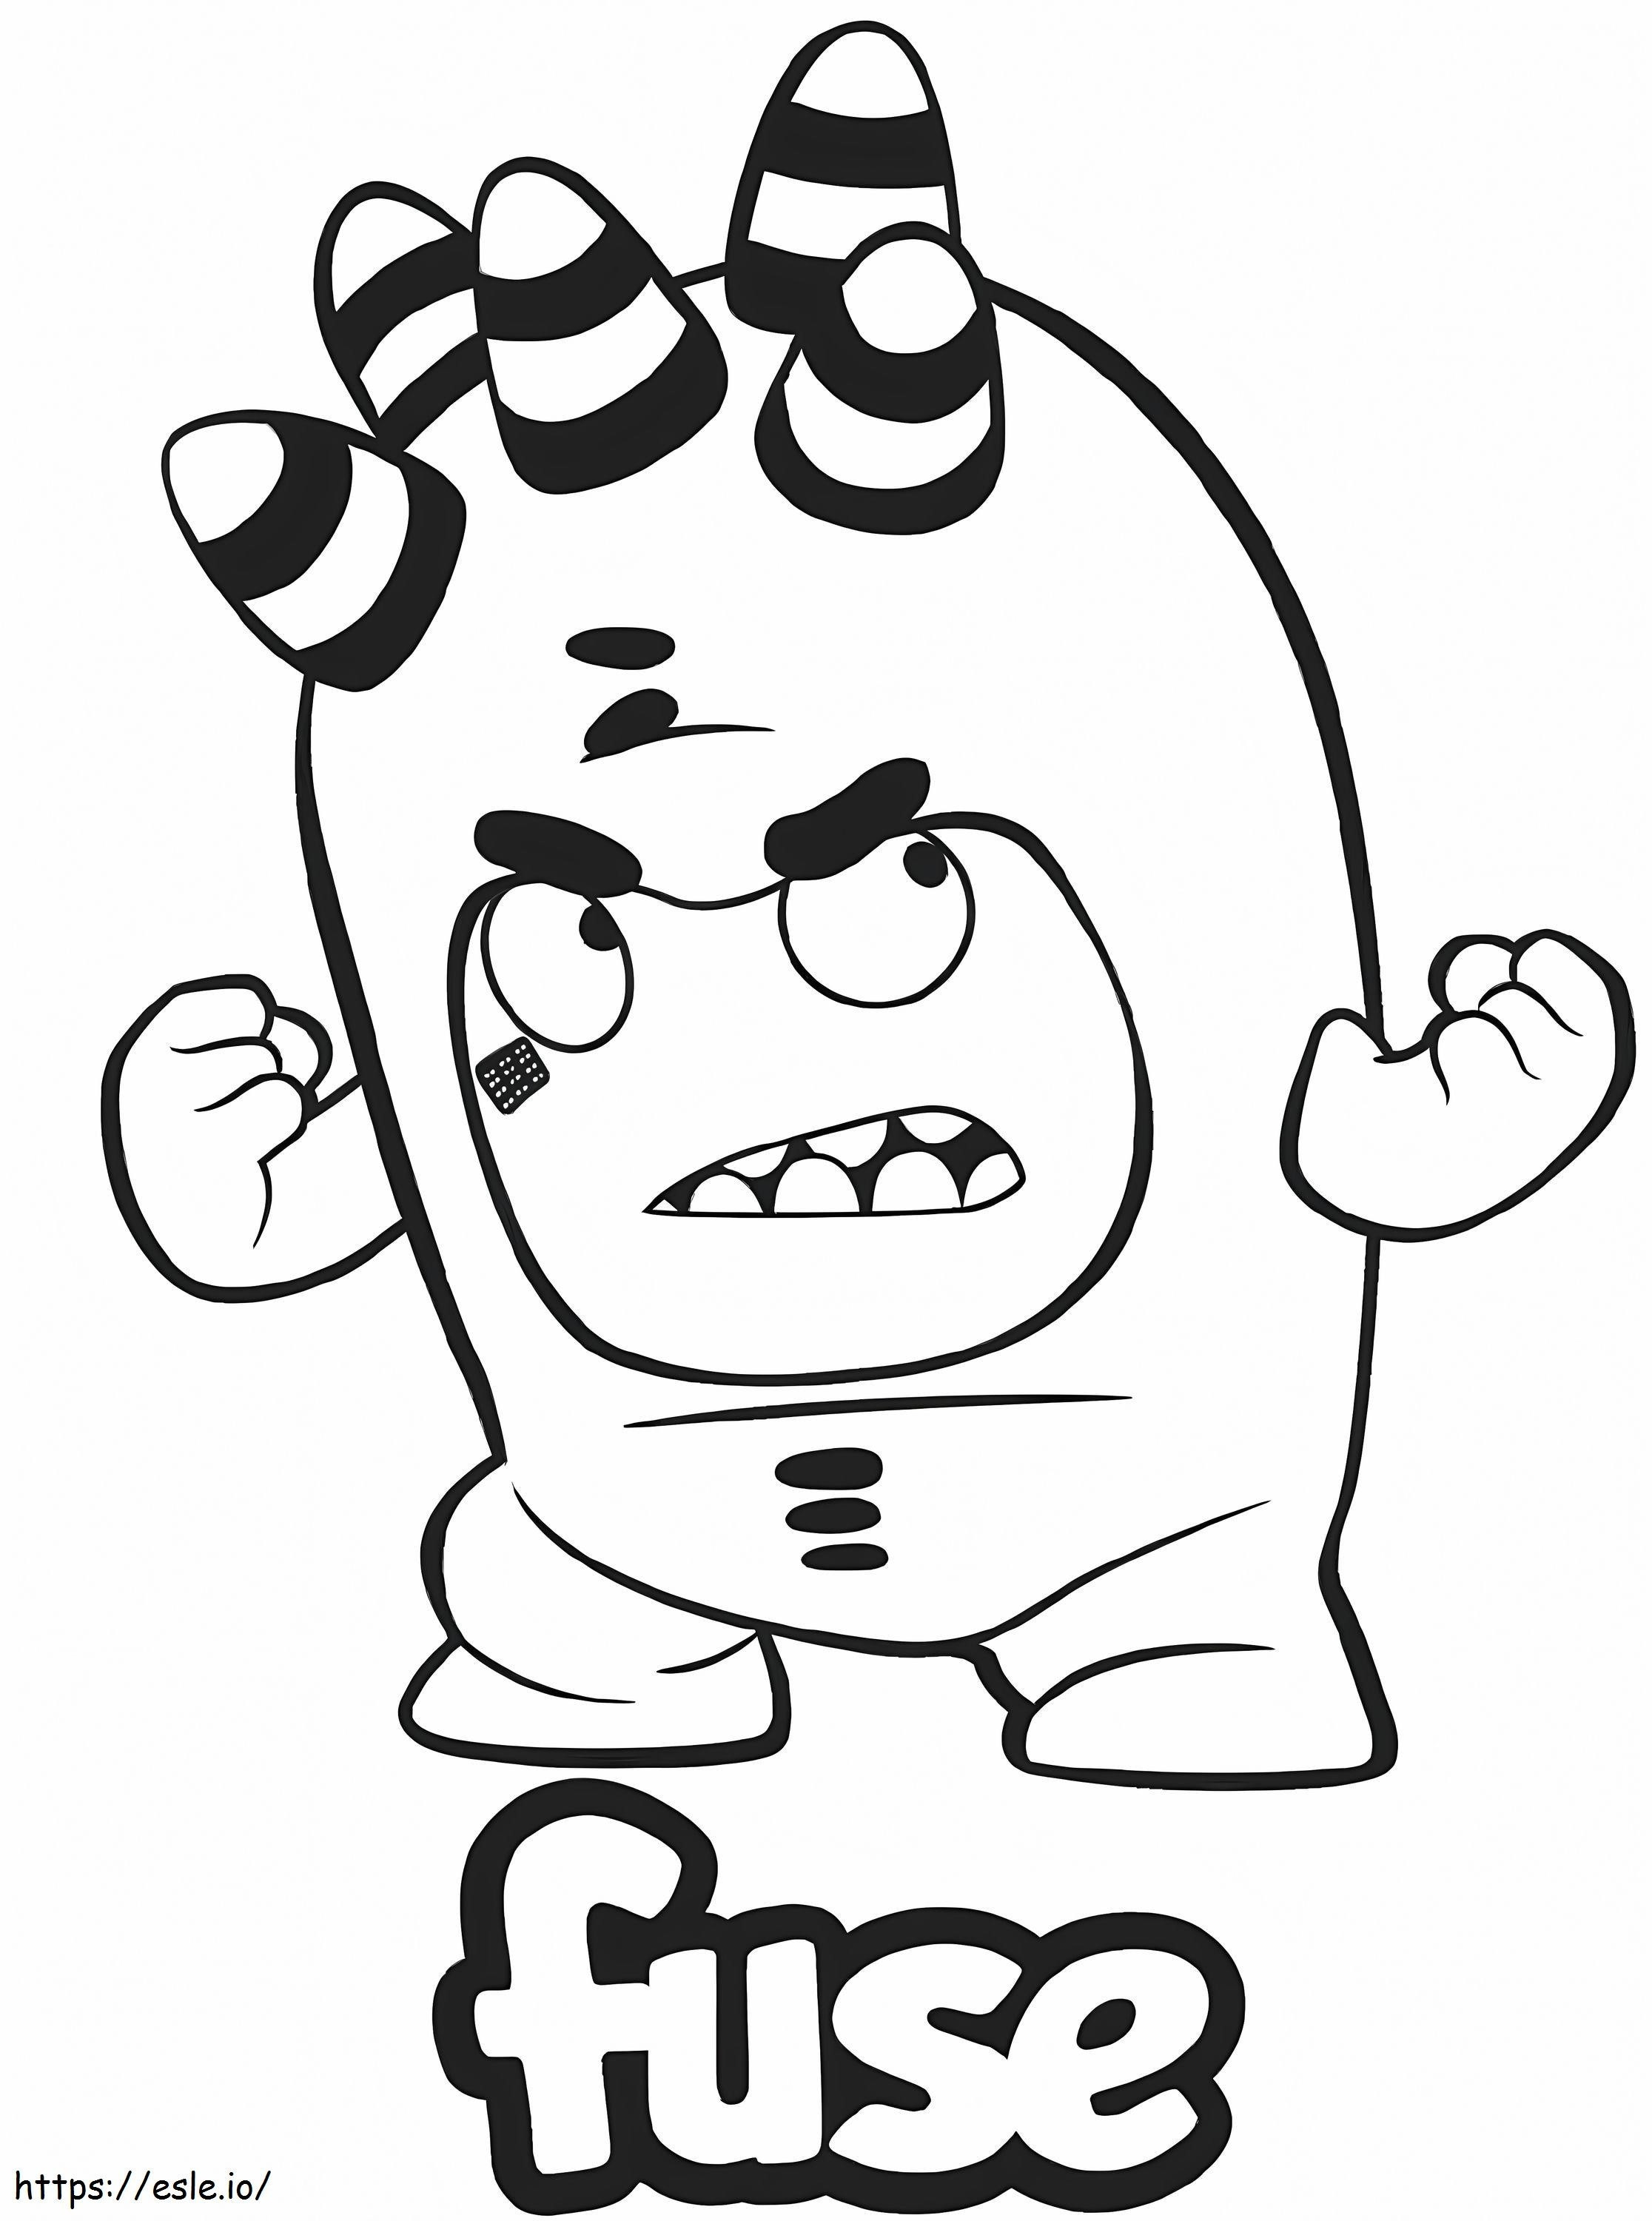 Merge Oddbods coloring page